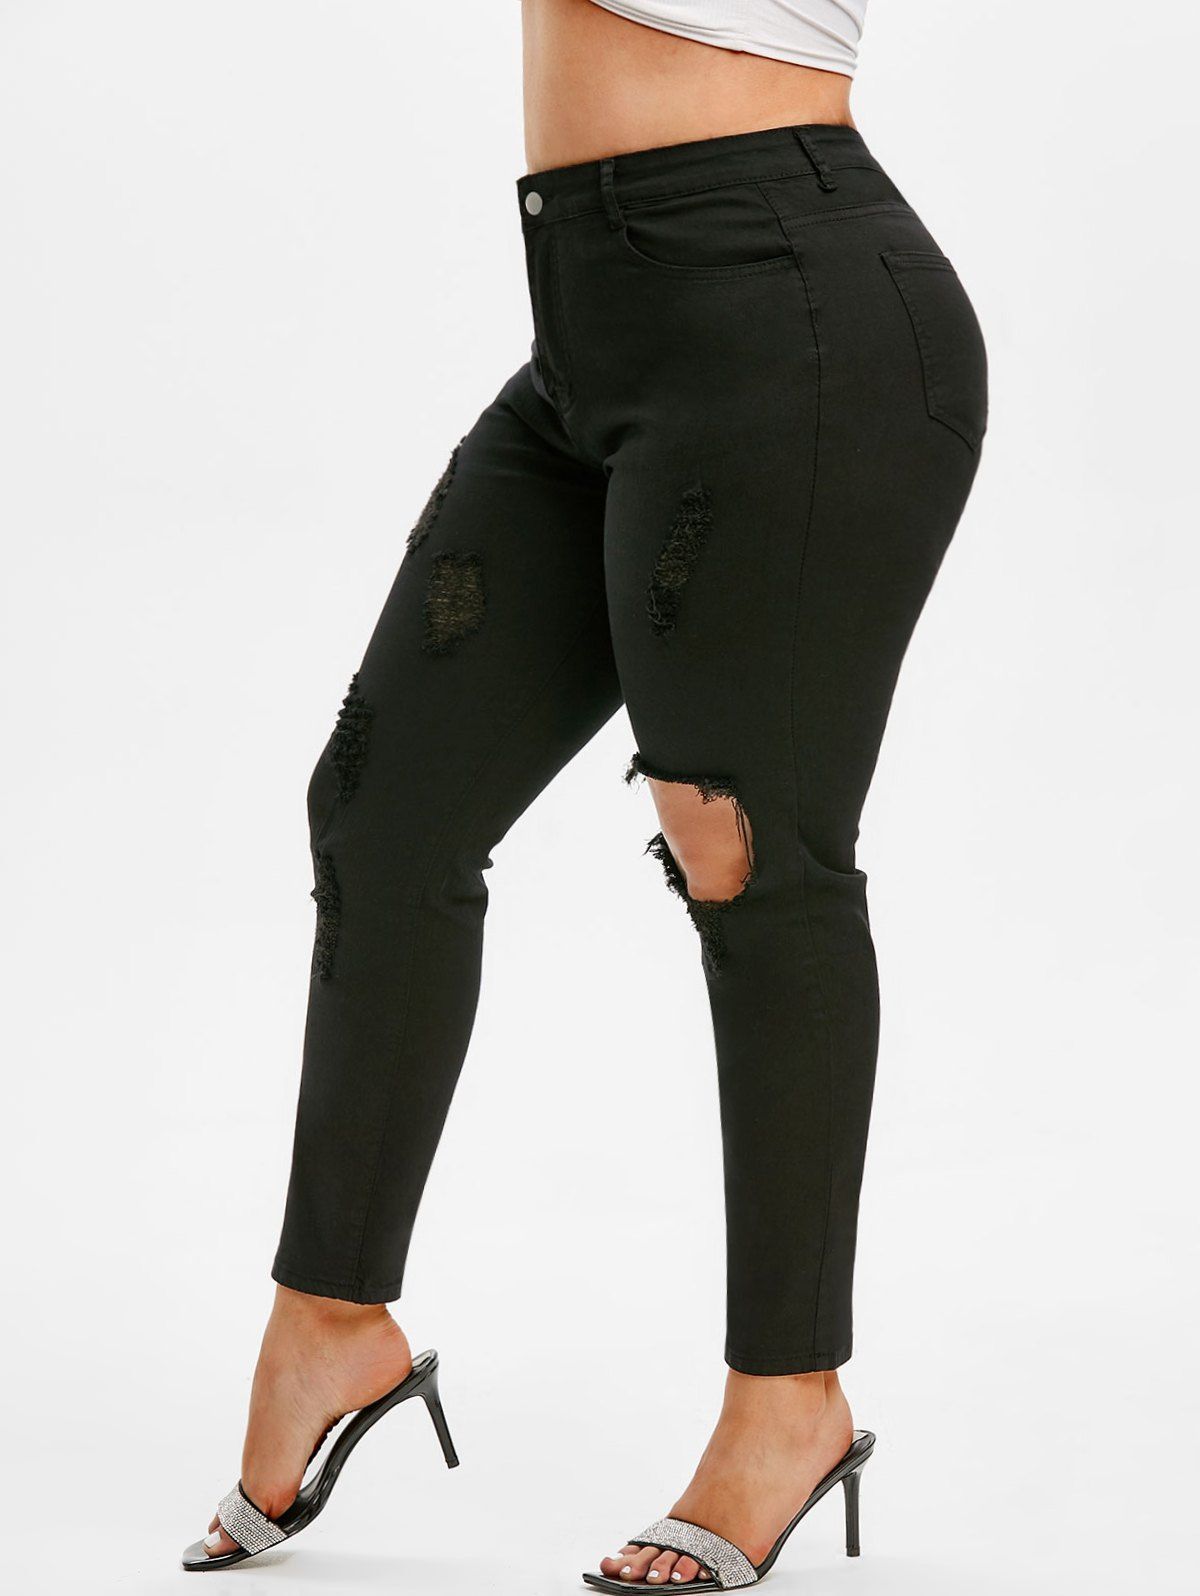 New Distressed Cut Out Plus Size Skinny Jeans  